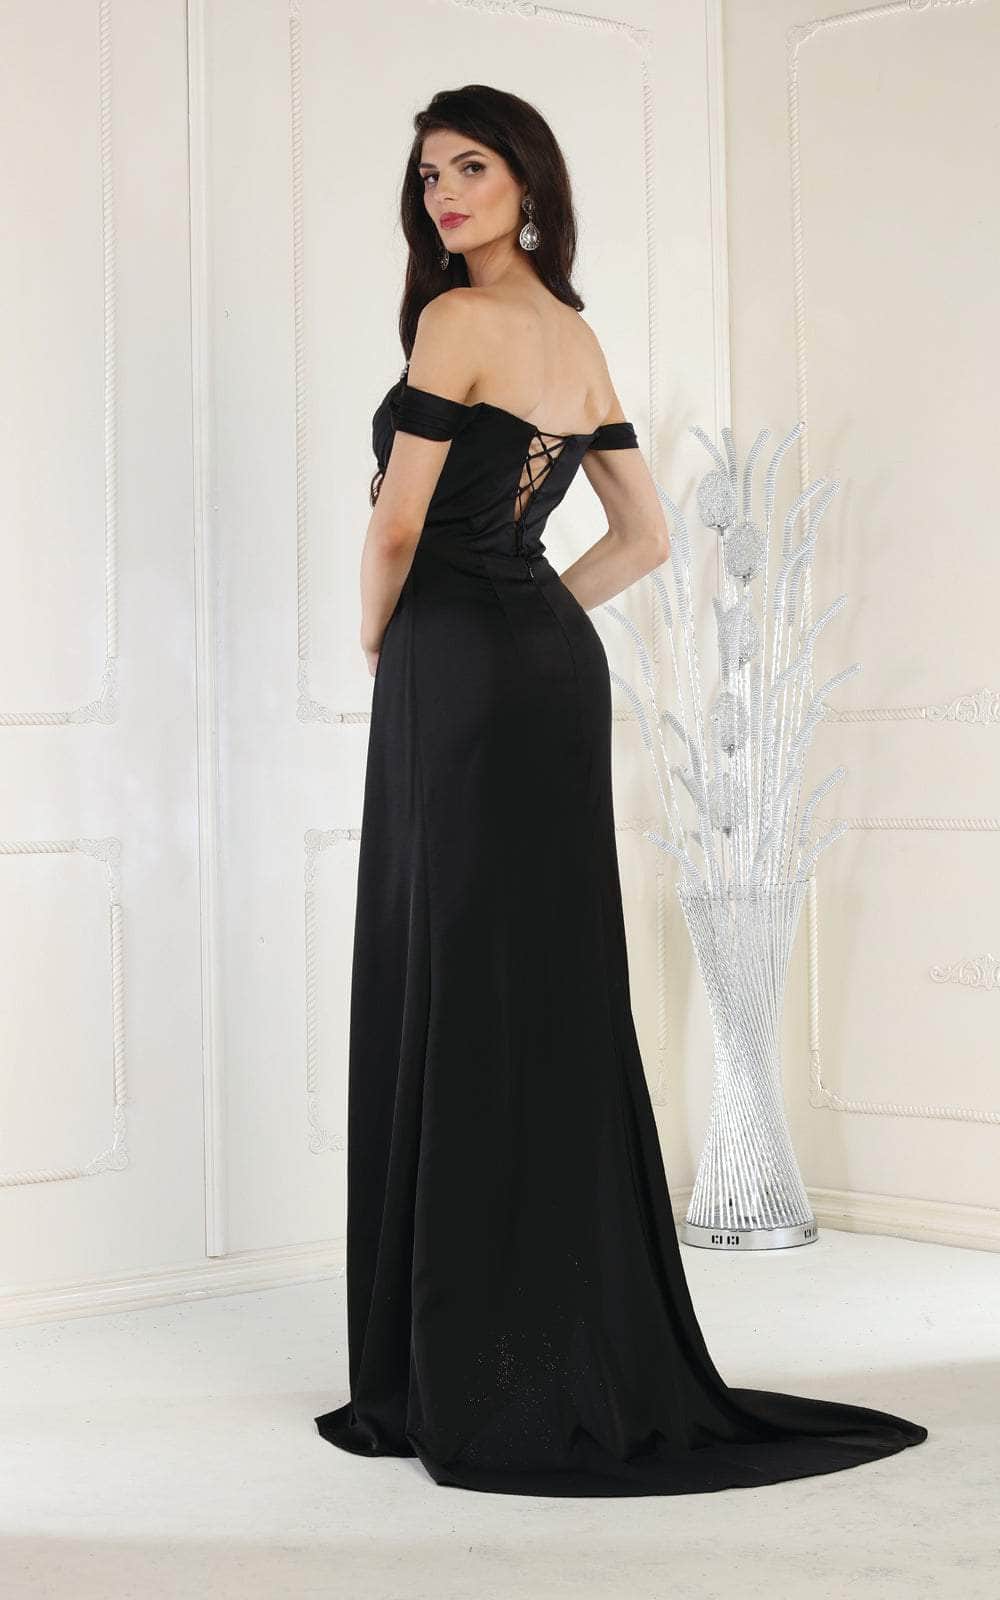 May Queen RQ7971 - Beaded Off-Shoulder Prom Dress Special Occasion Dress